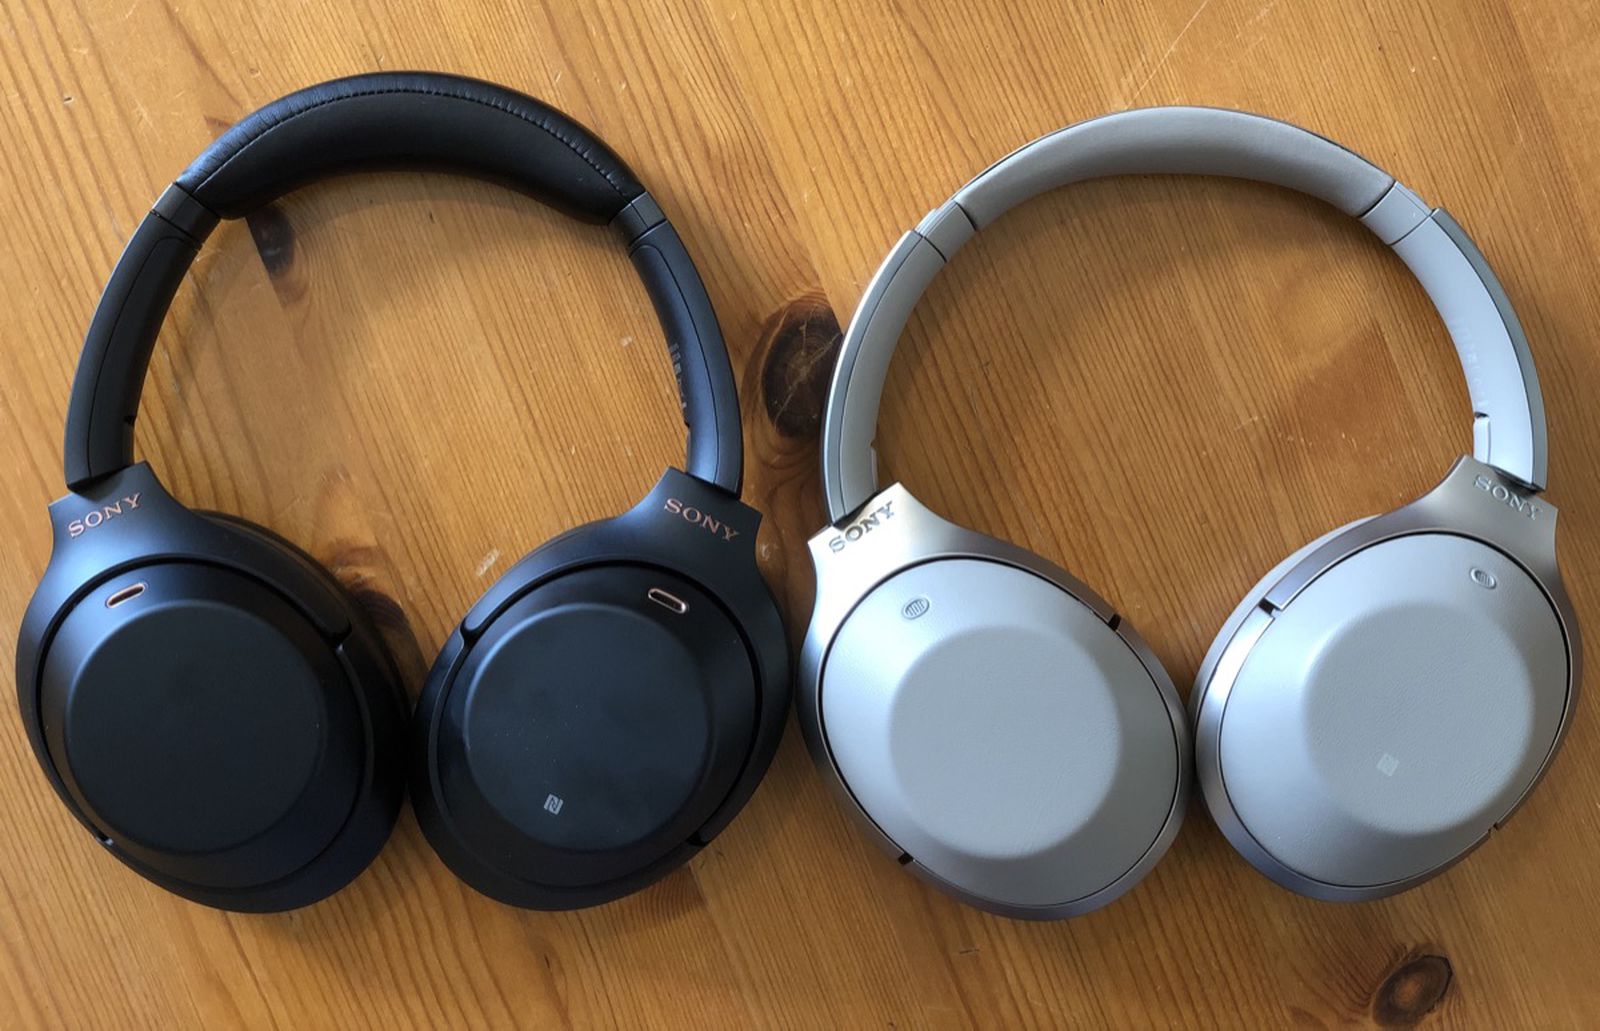 Sony's Unreleased WH-1000XM4 Headphones Show Up in Walmart Listing 